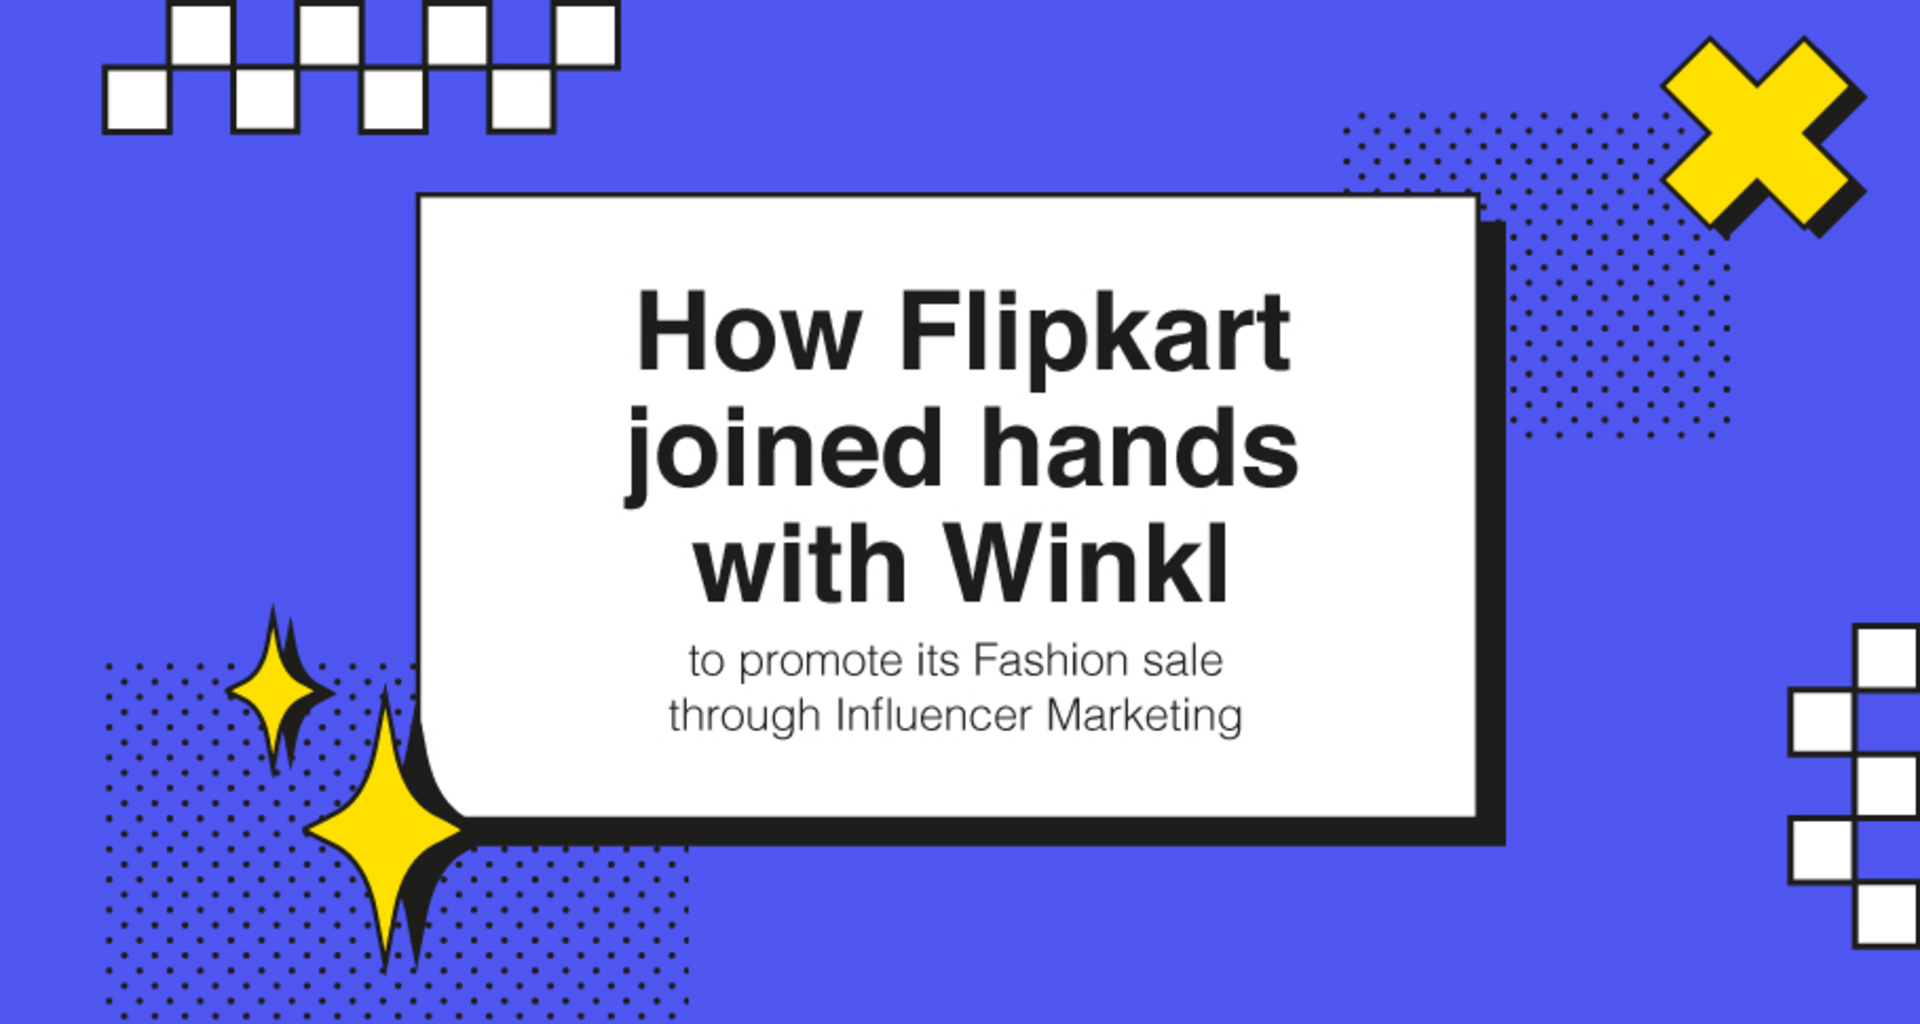 How Flipkart joined hands with Winkl to promote its Fashion sale through Influencer Marketing  image